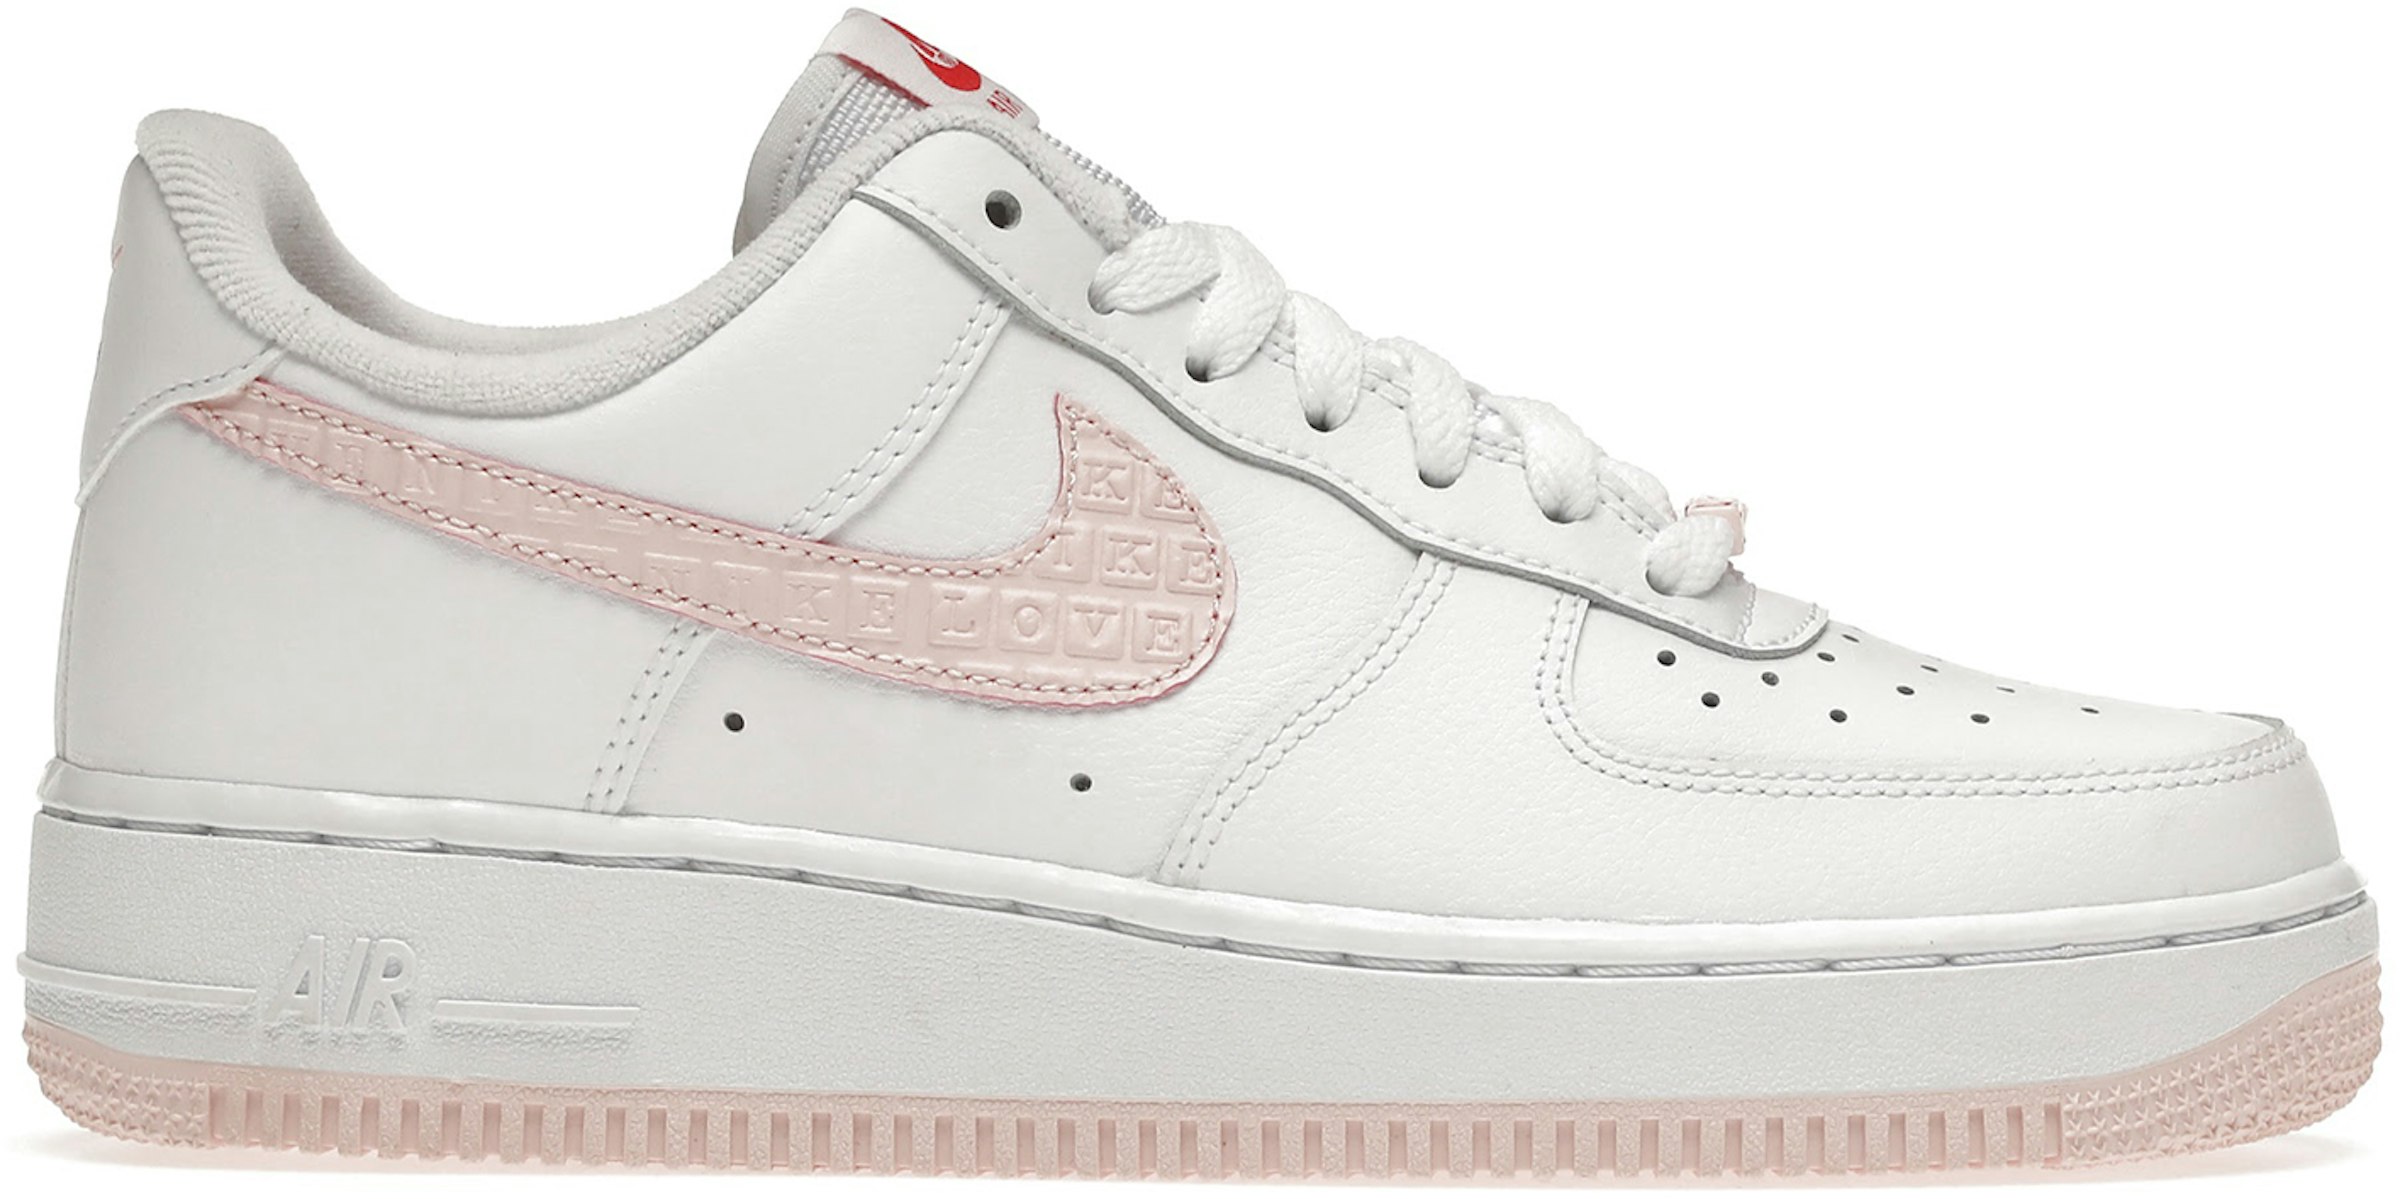 Vejhus boom forpligtelse Nike Air Force 1 Low VD Valentine's Day (2022) (Women's) - DQ9320-100 - US